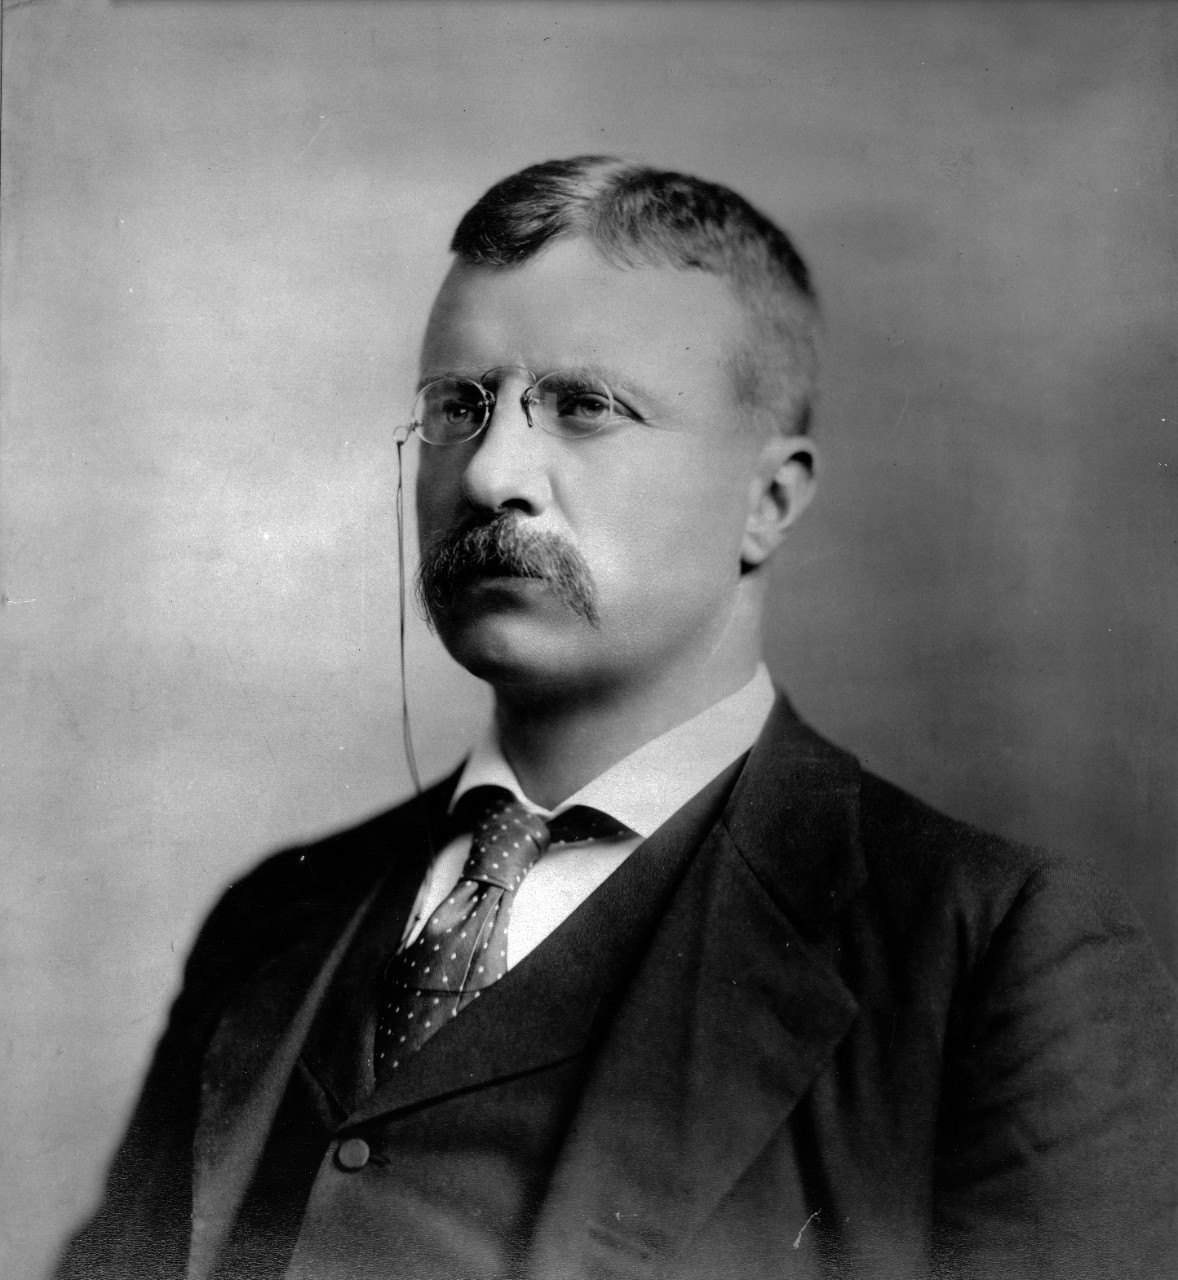 A picture of Theodore Roosevelt who was assistant secretary of the navy and served on the Naval War Board.